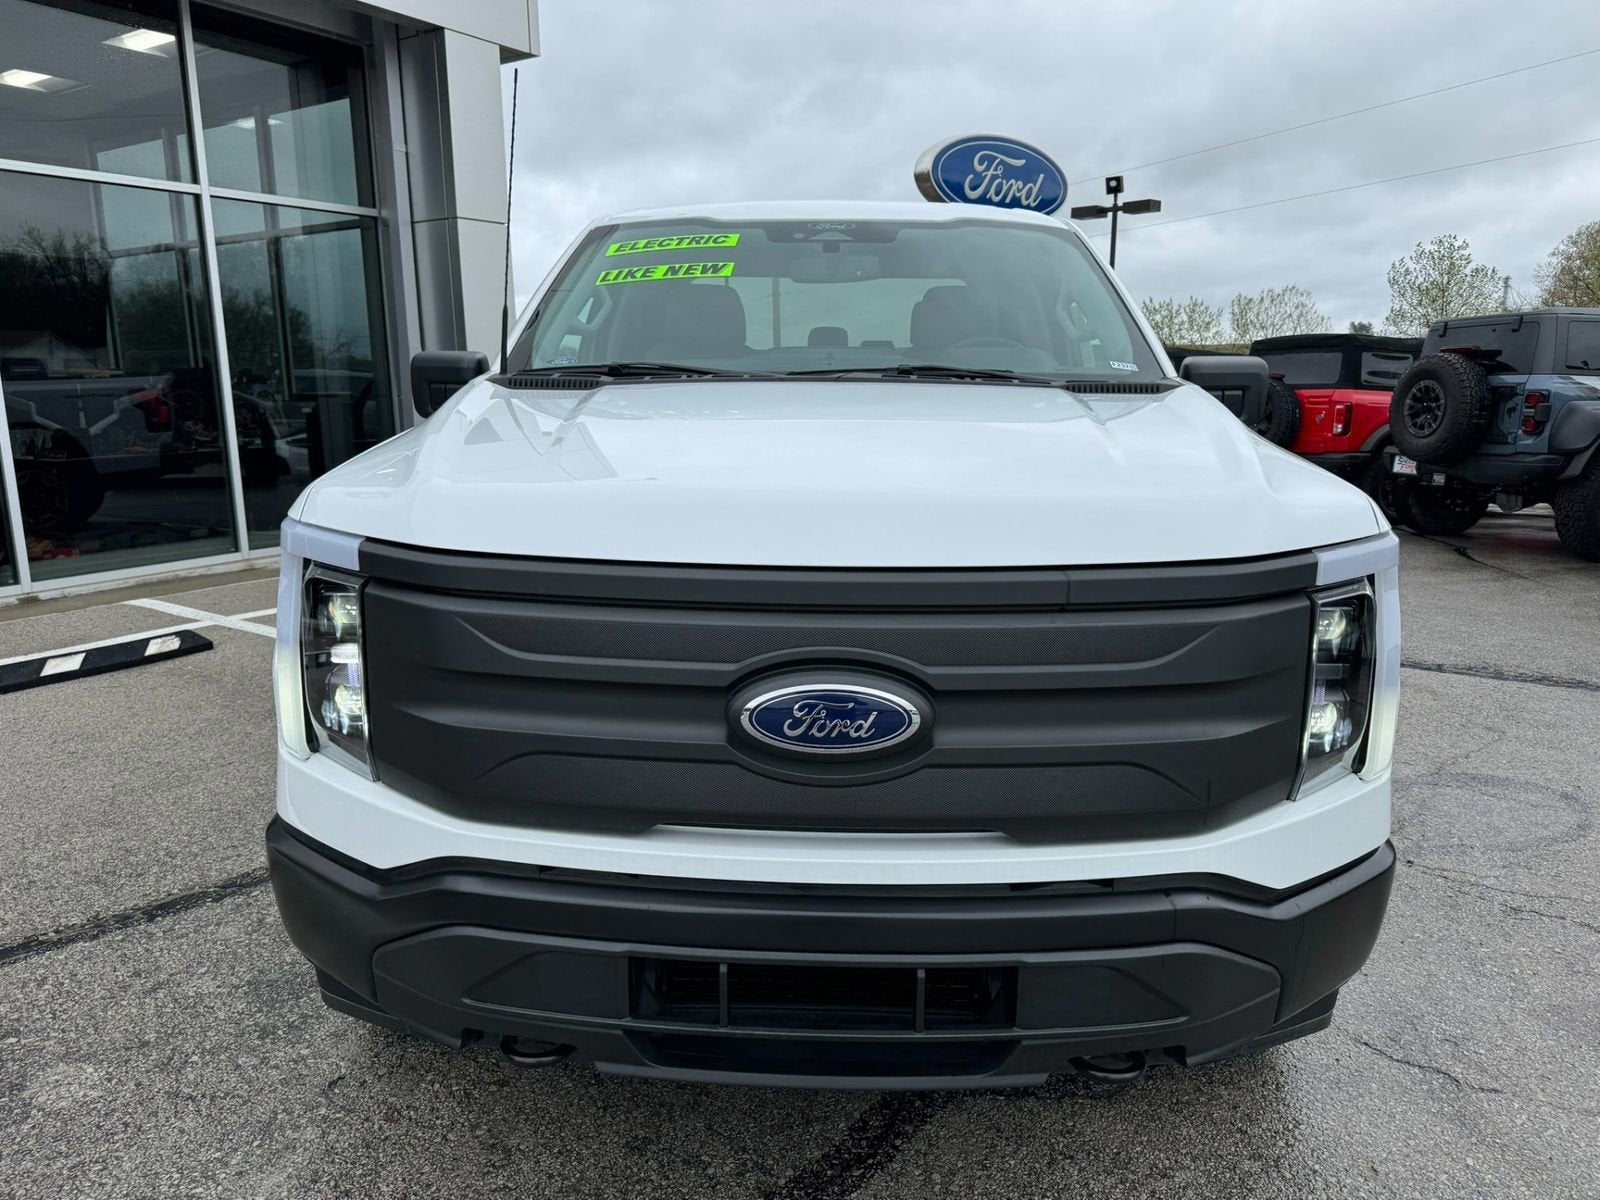 Used 2022 Ford F-150 Lightning Pro with VIN 1FTVW1EL3NWG14896 for sale in Gower, MO